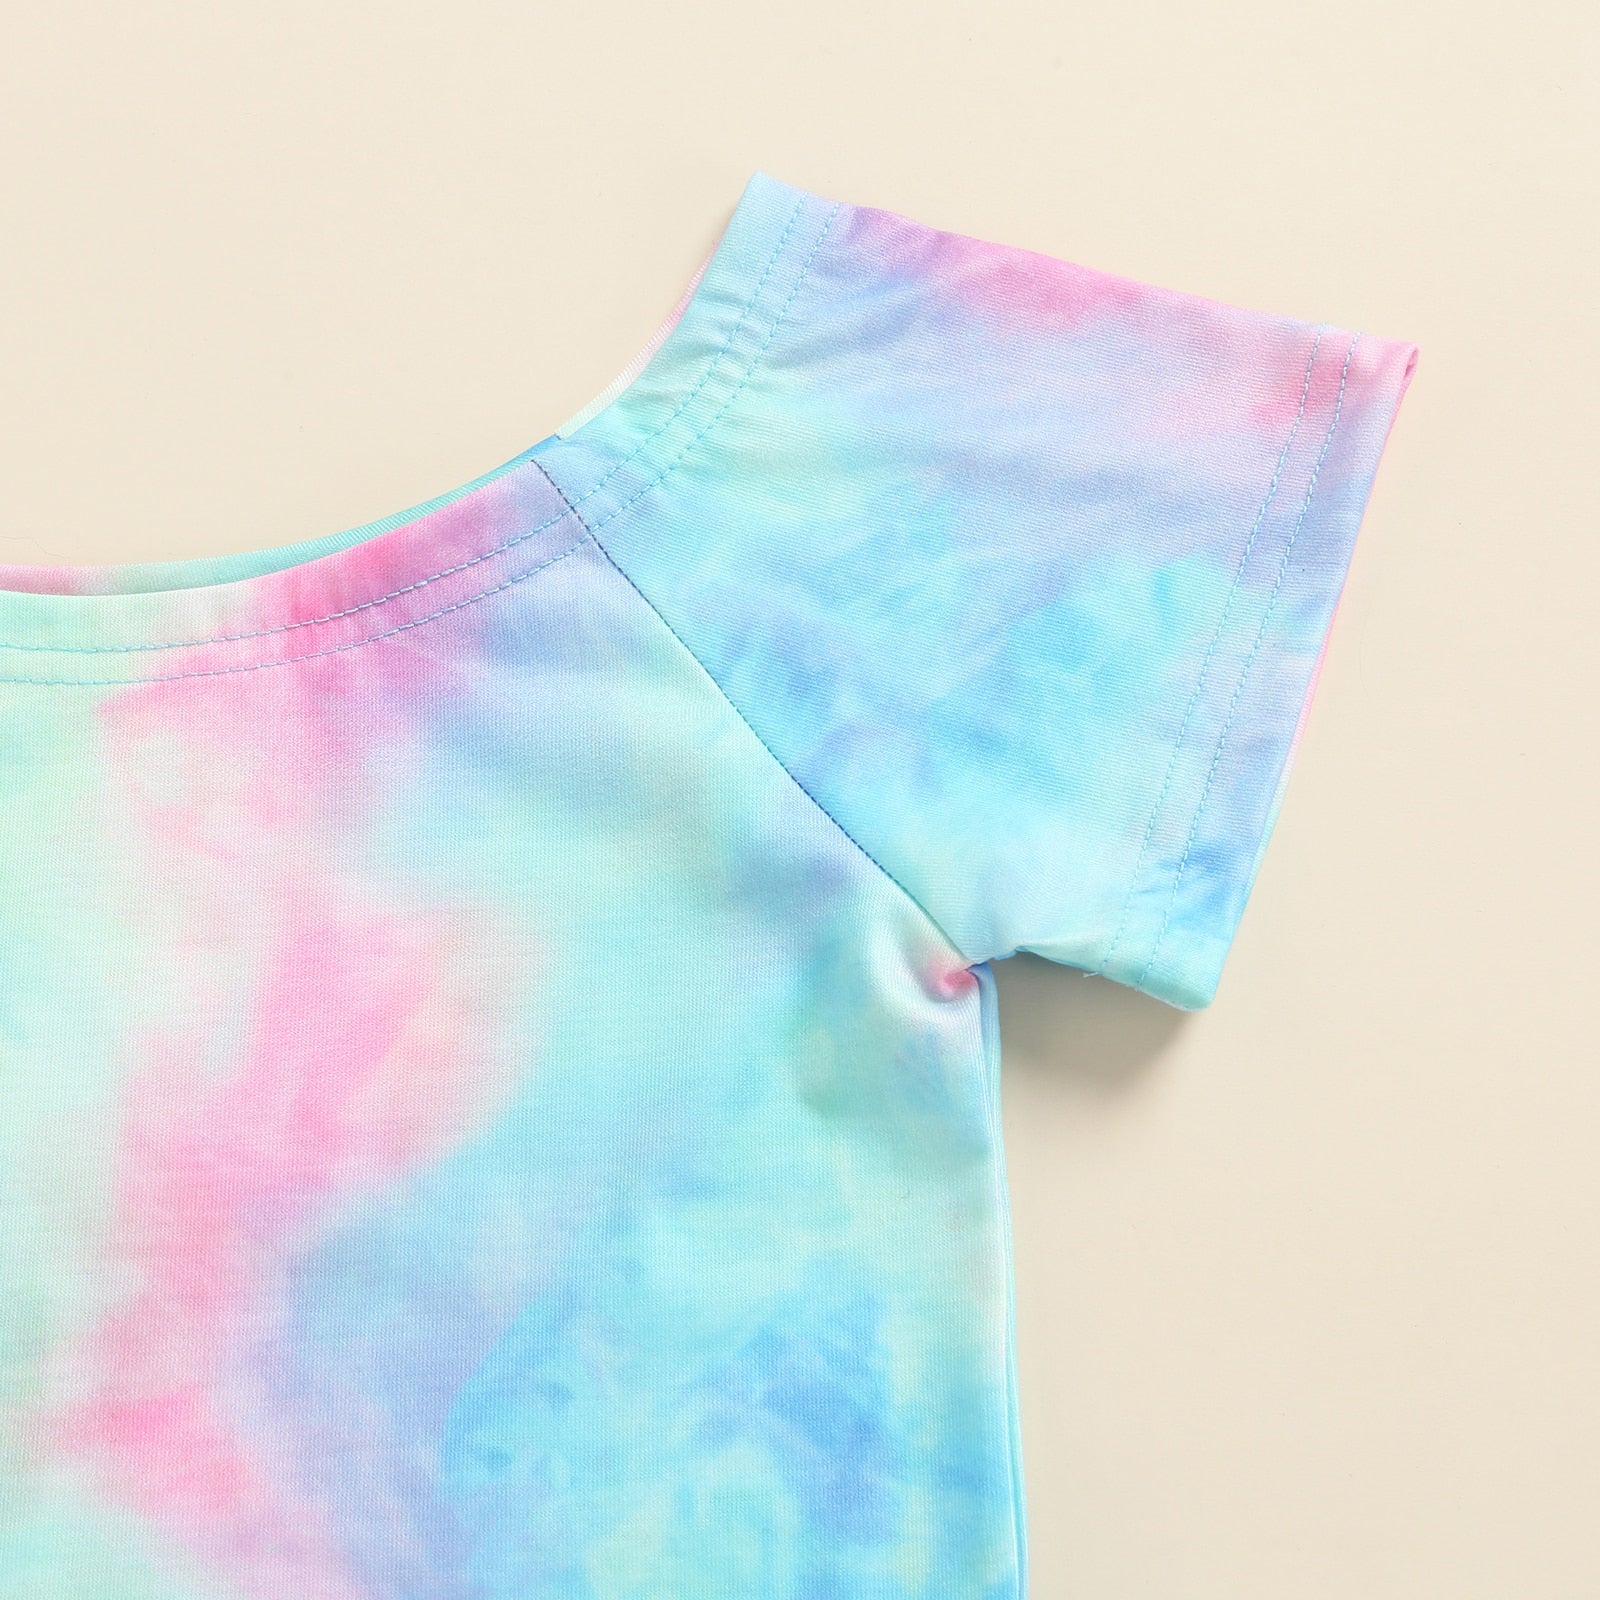 Tilly Tie-Dye Outfit